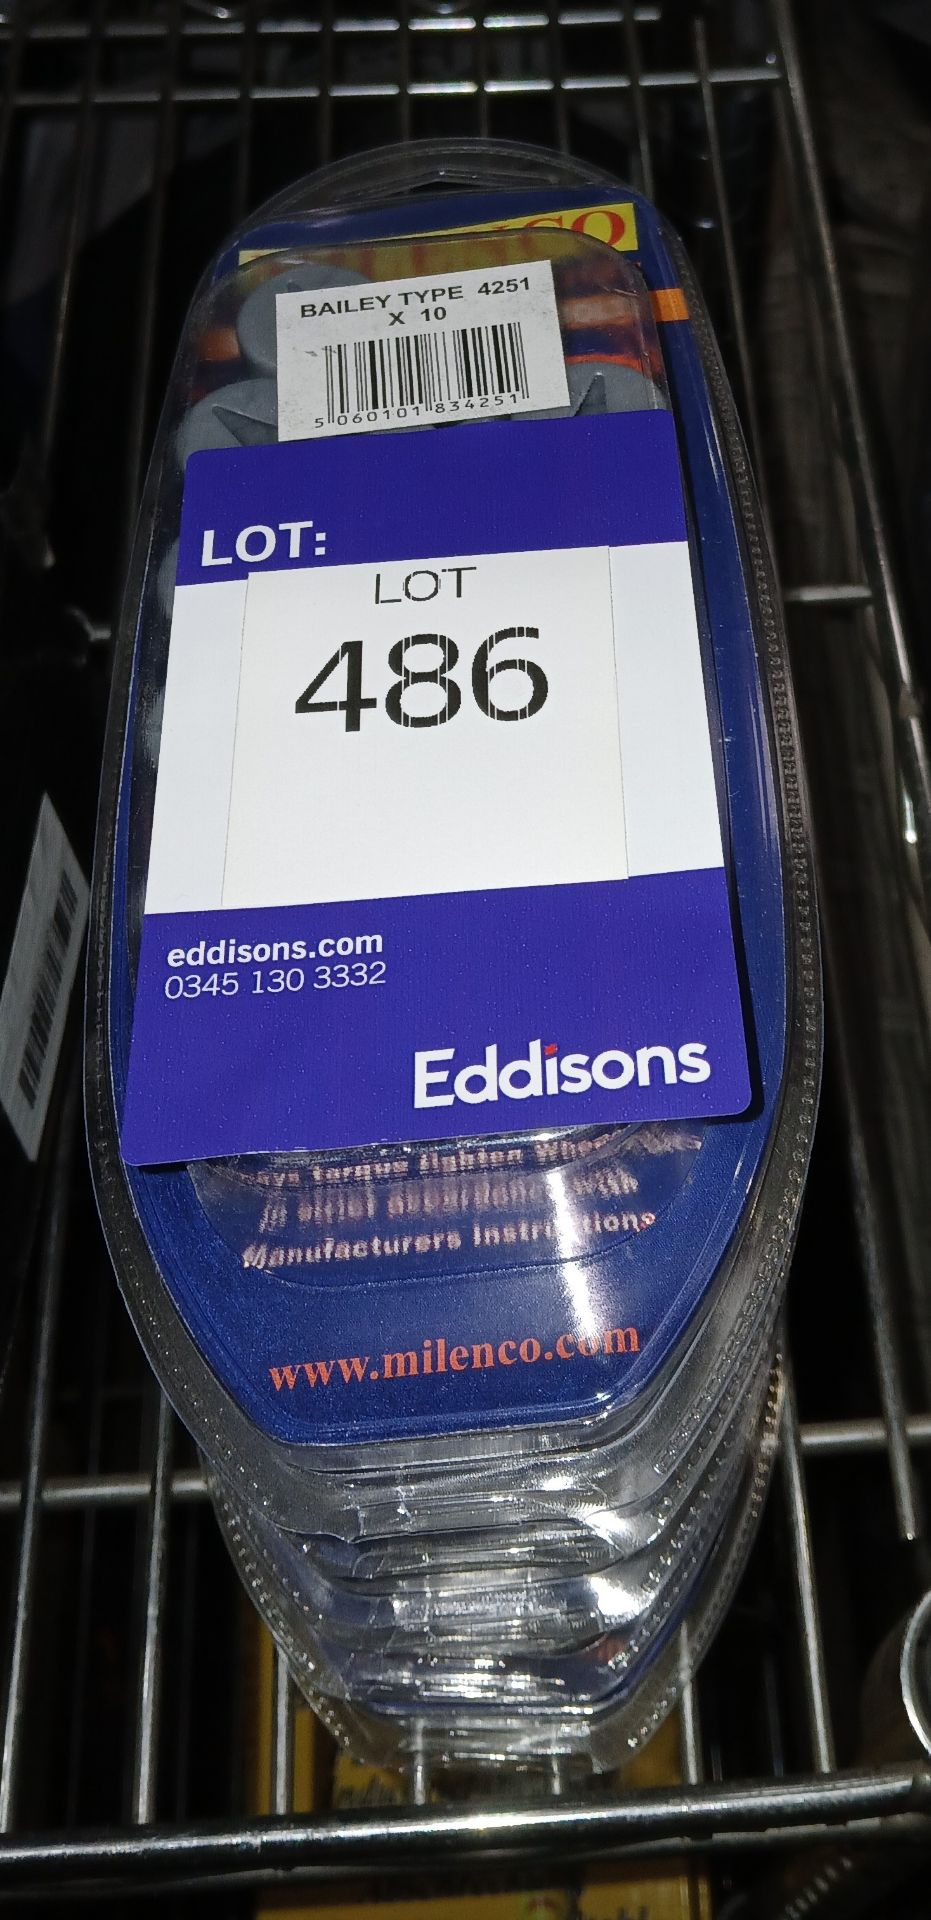 5 x Milenco Wheel Bolt Indicators (Please note, Viewing Strongly Recommended - Eddisons have not